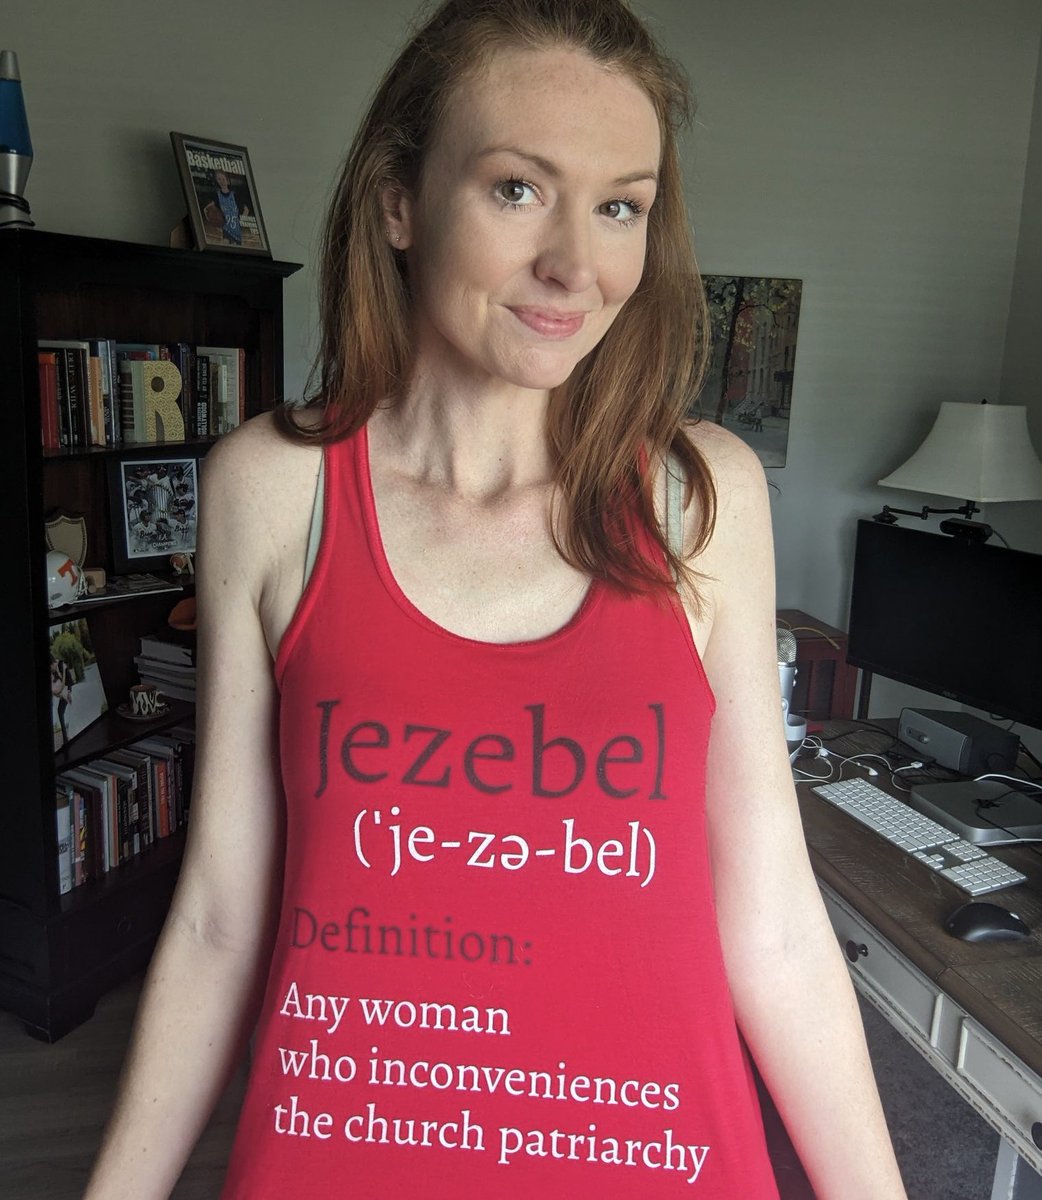 The true definition of Jezebel: women who are in complete rebellion to God and His ways, just like the two Jezebels written about in the Bible. It’s a dangerous place to be. “For rebellion is as the sin of witchcraft” (1 Sam. 15:23).